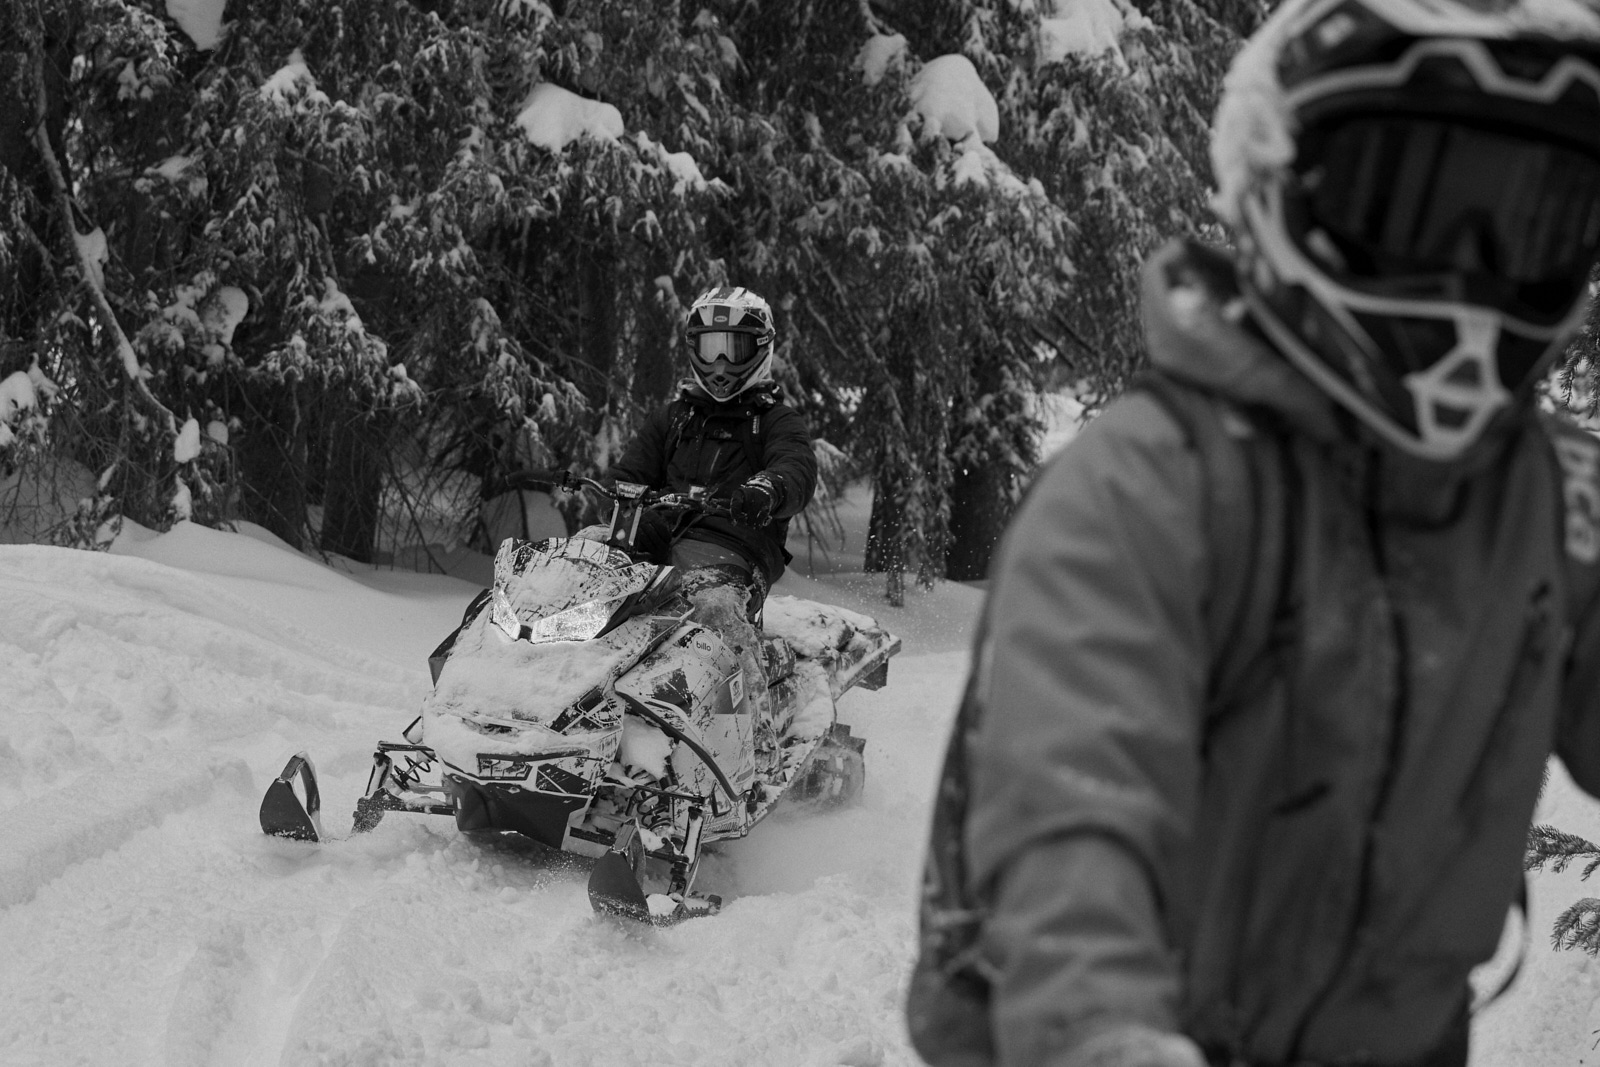 Extreme action sports and athletes traveling throughout Colorado. Photographed and filmed several athletes ranging from ice climbing, skinning and skiing, to snowmobiling during extreme winter conditions.